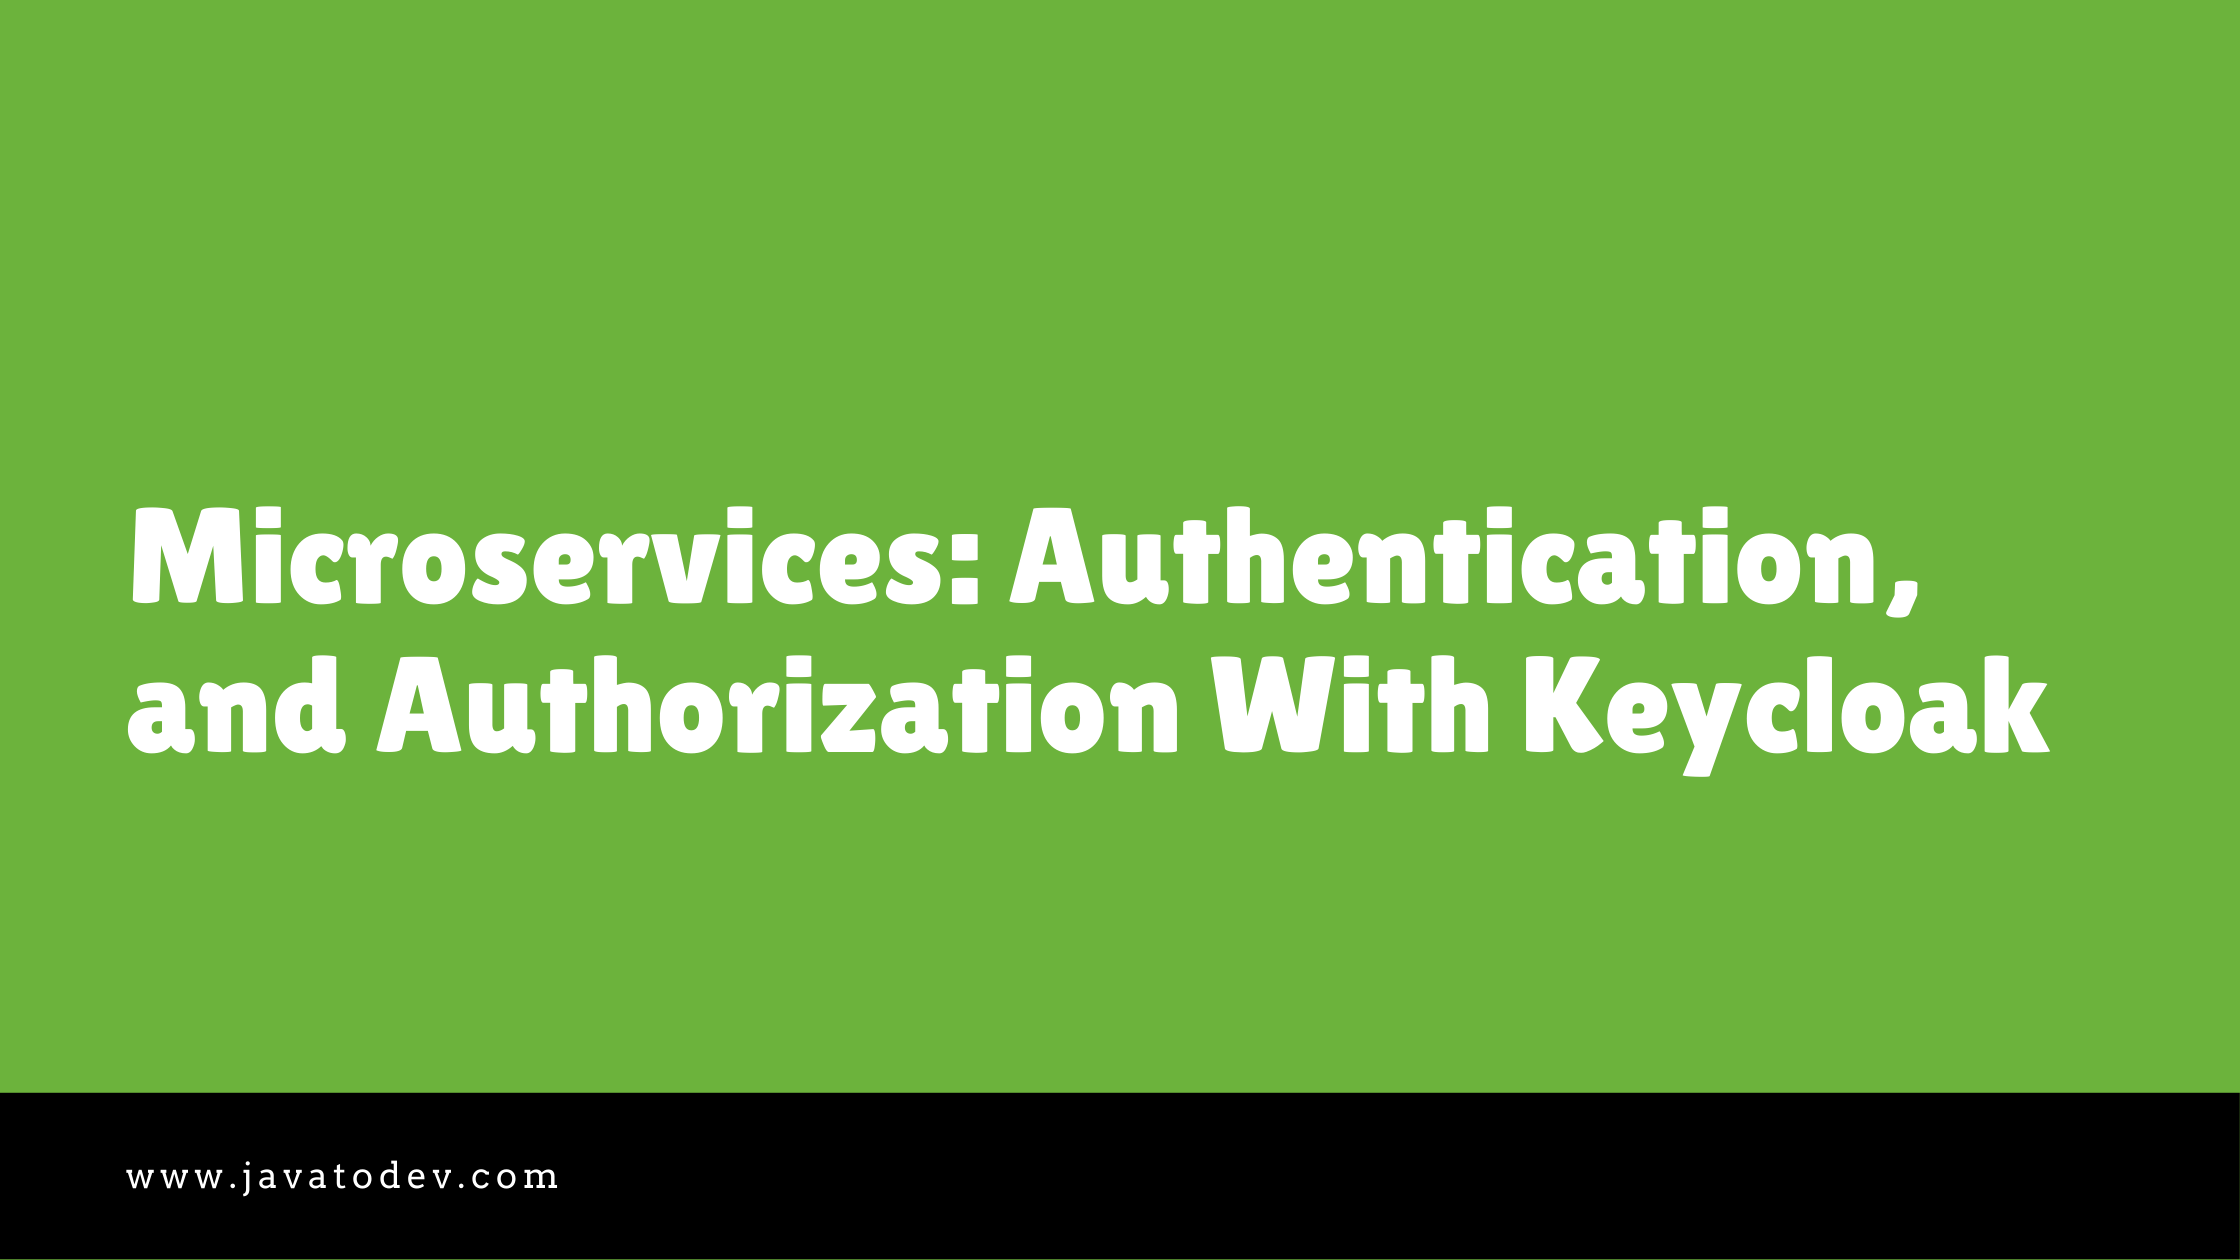 Microservices - Authentication, and Authorization With Keycloak